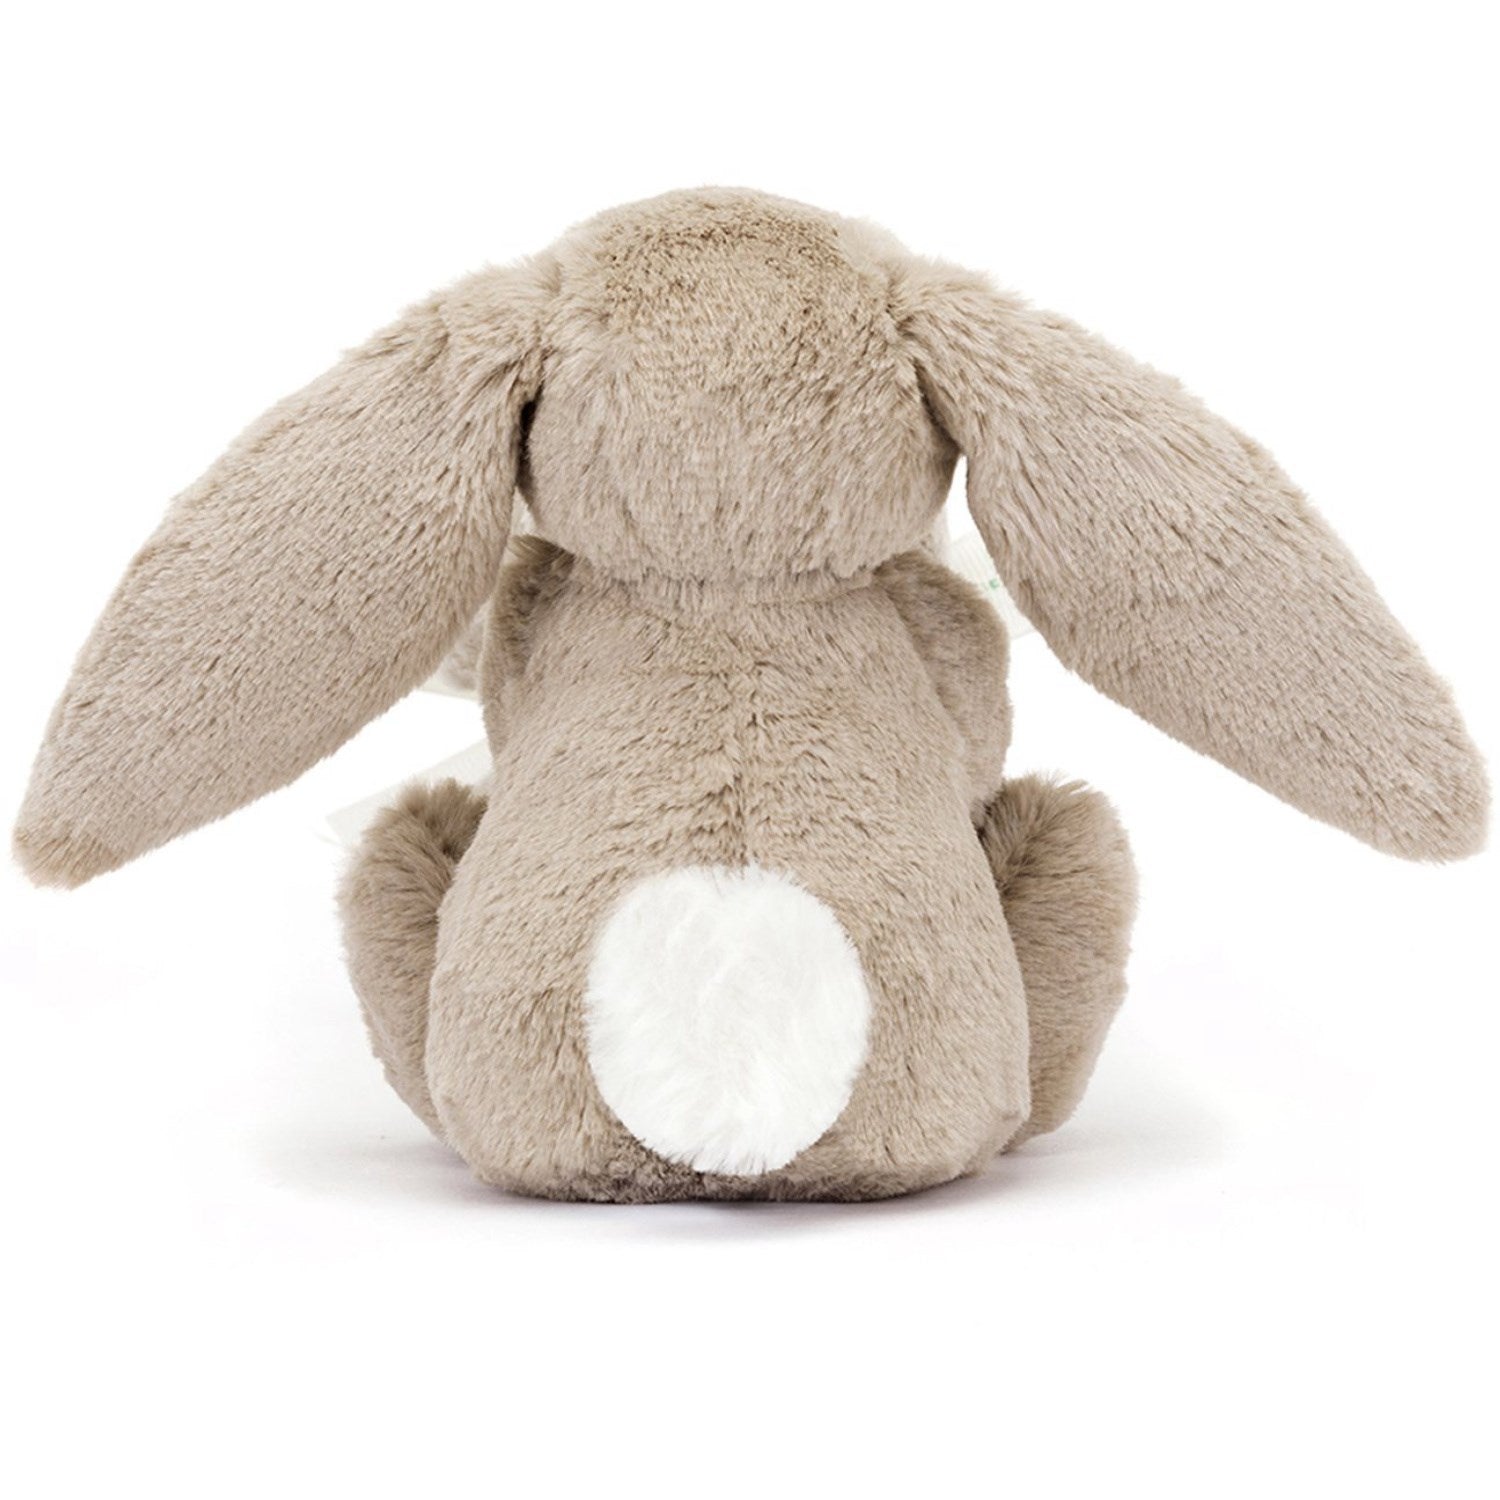 Jellycat Bashful Beige Bunny Soother 5